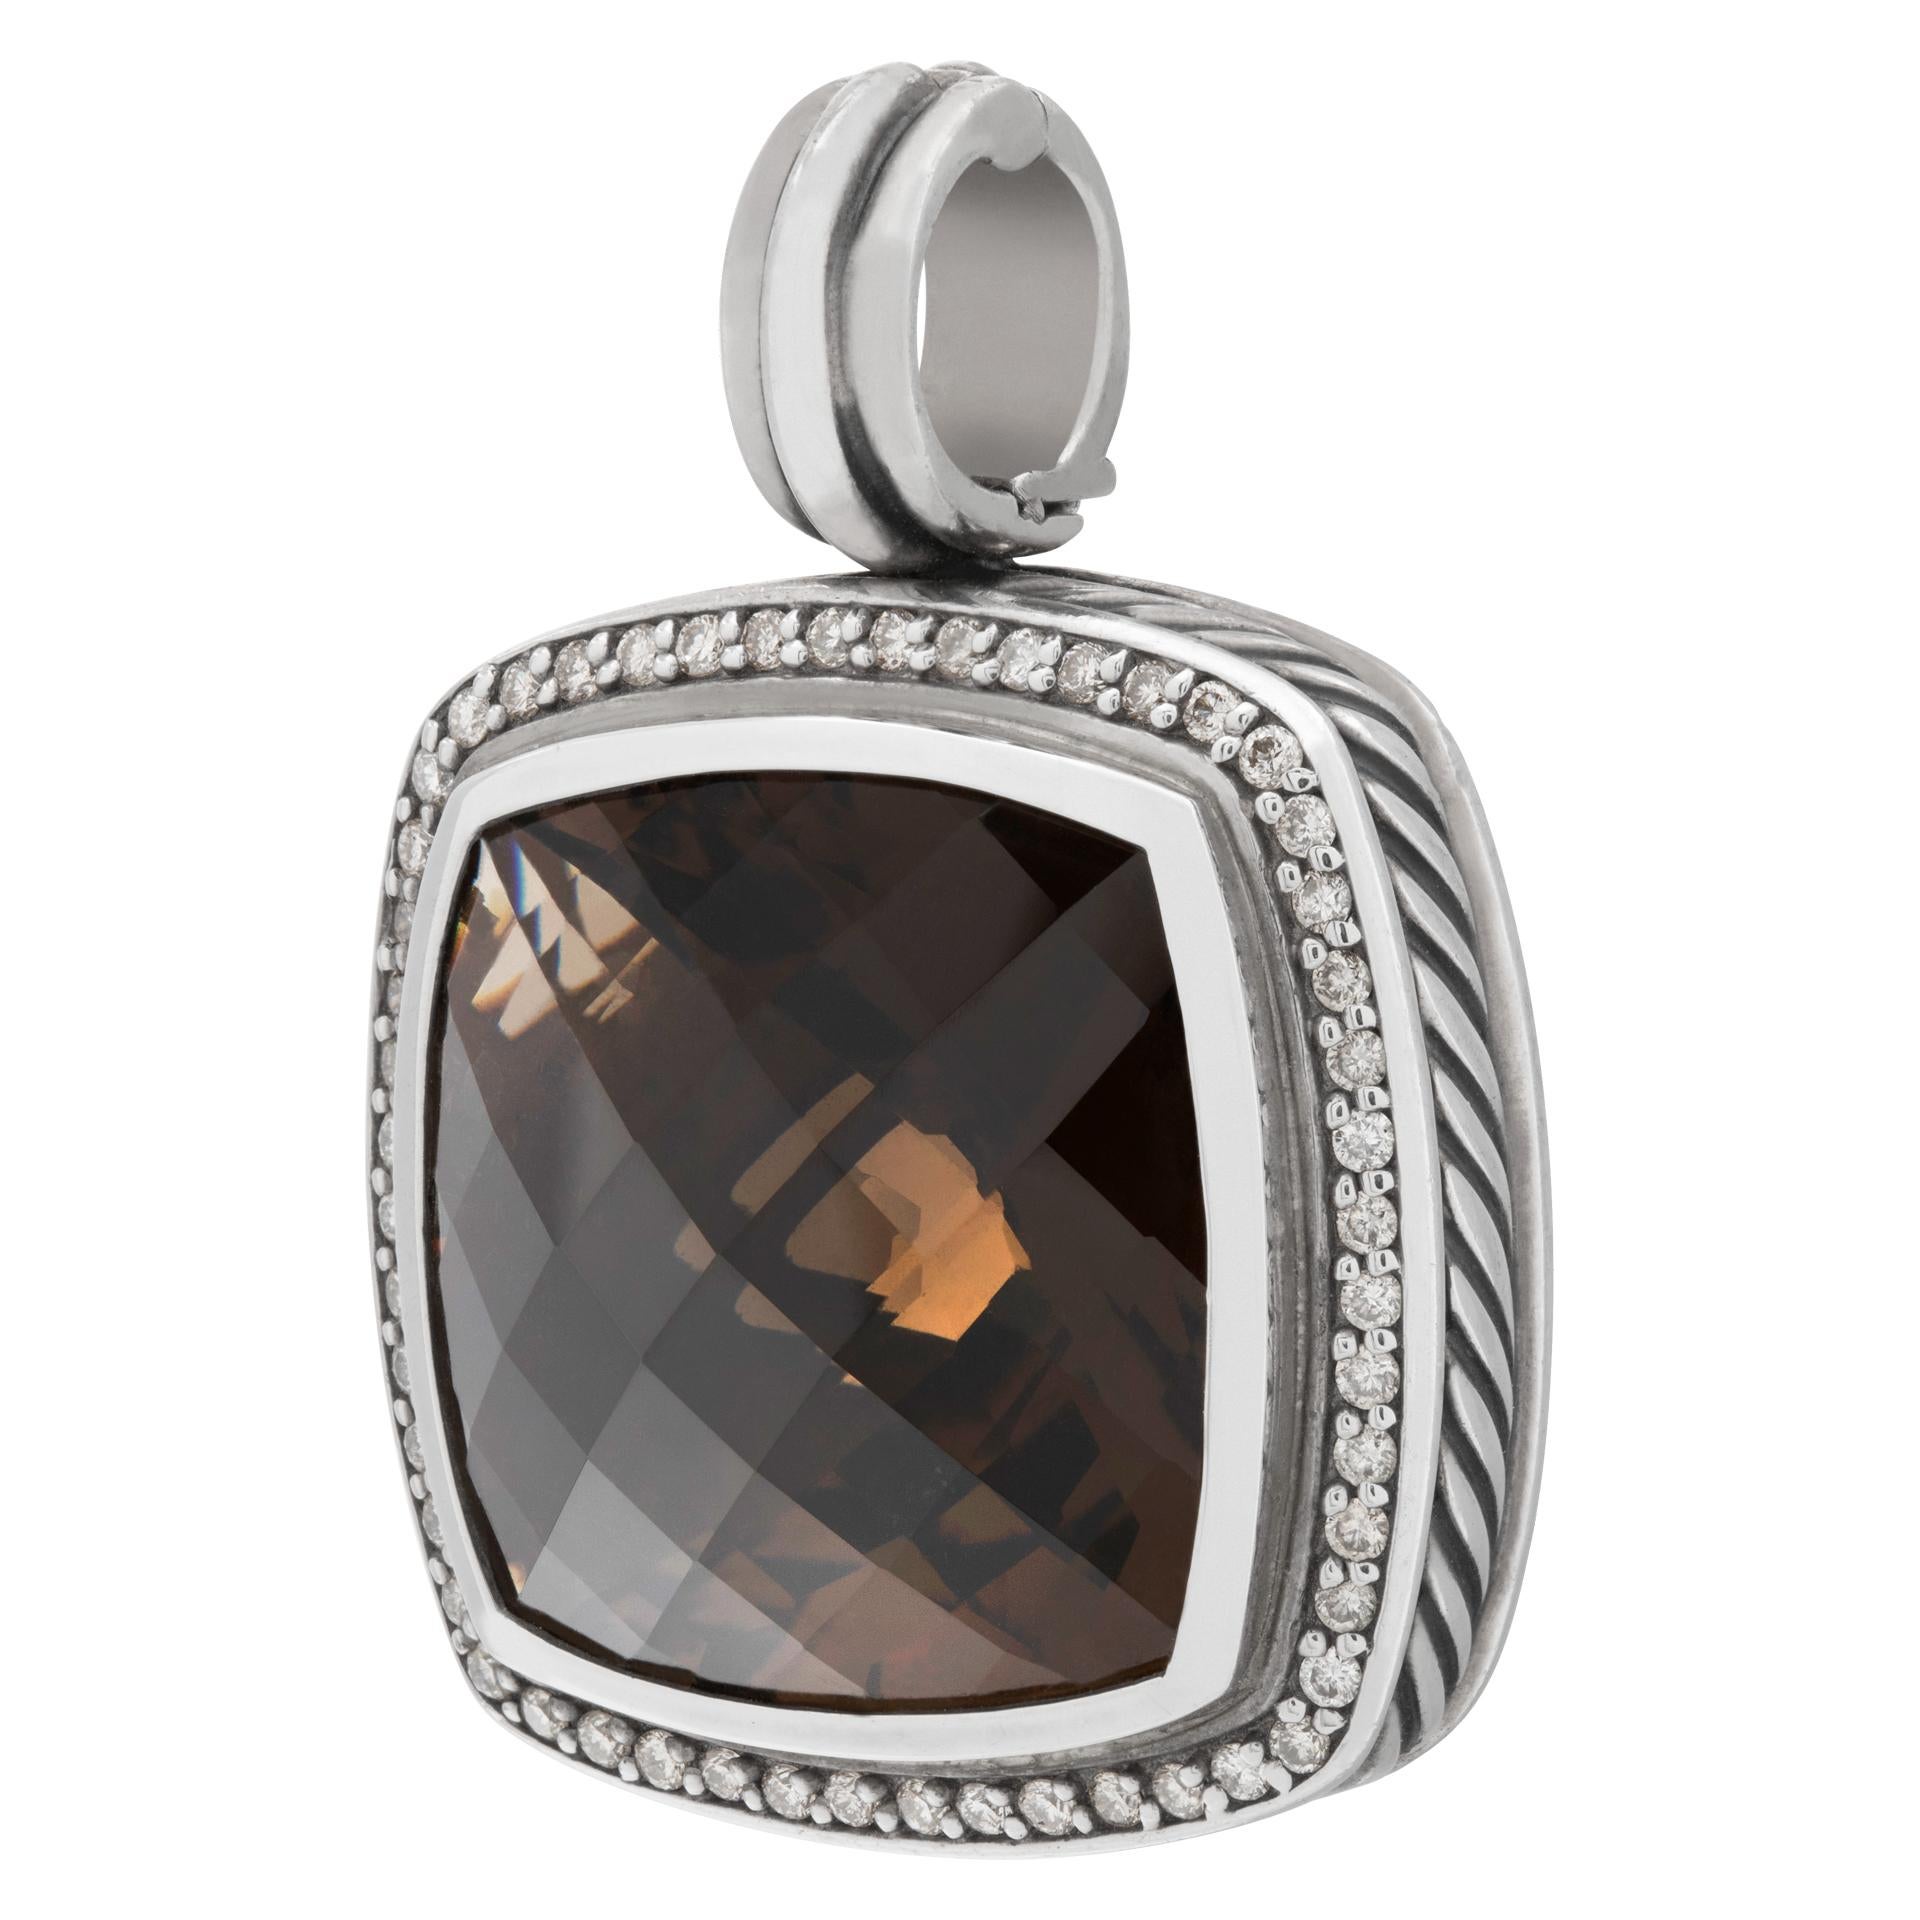 David Yurman Albion collection, smoky quartz & diamonds pendant, set in sterling silver. Hinged bale for easy wear. 25 mm x 26 mm